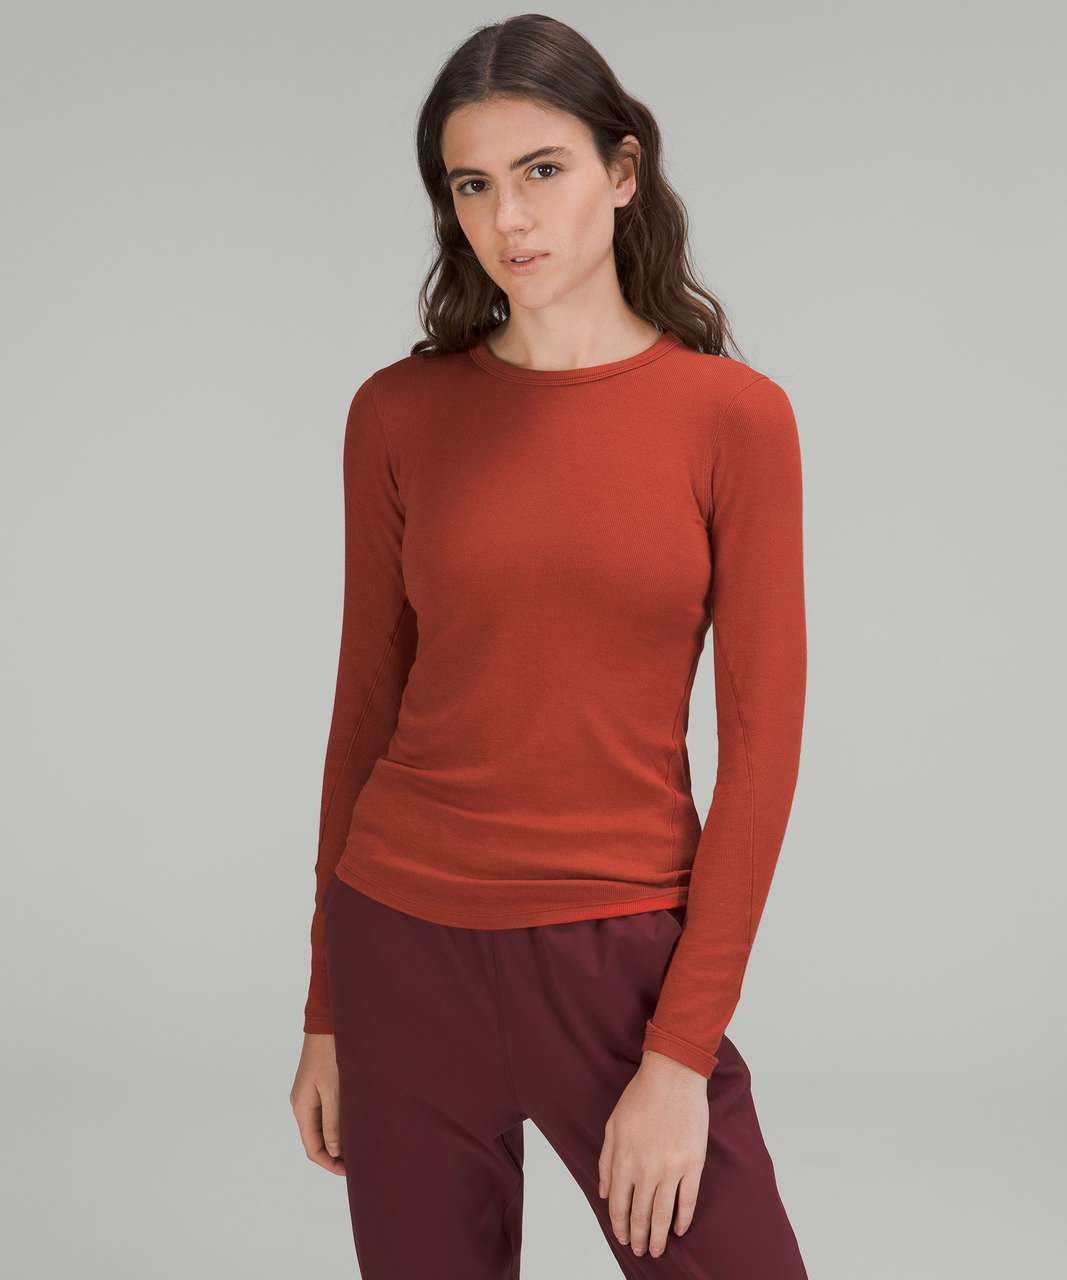 Hold Tight Cropped Long-Sleeve Shirt